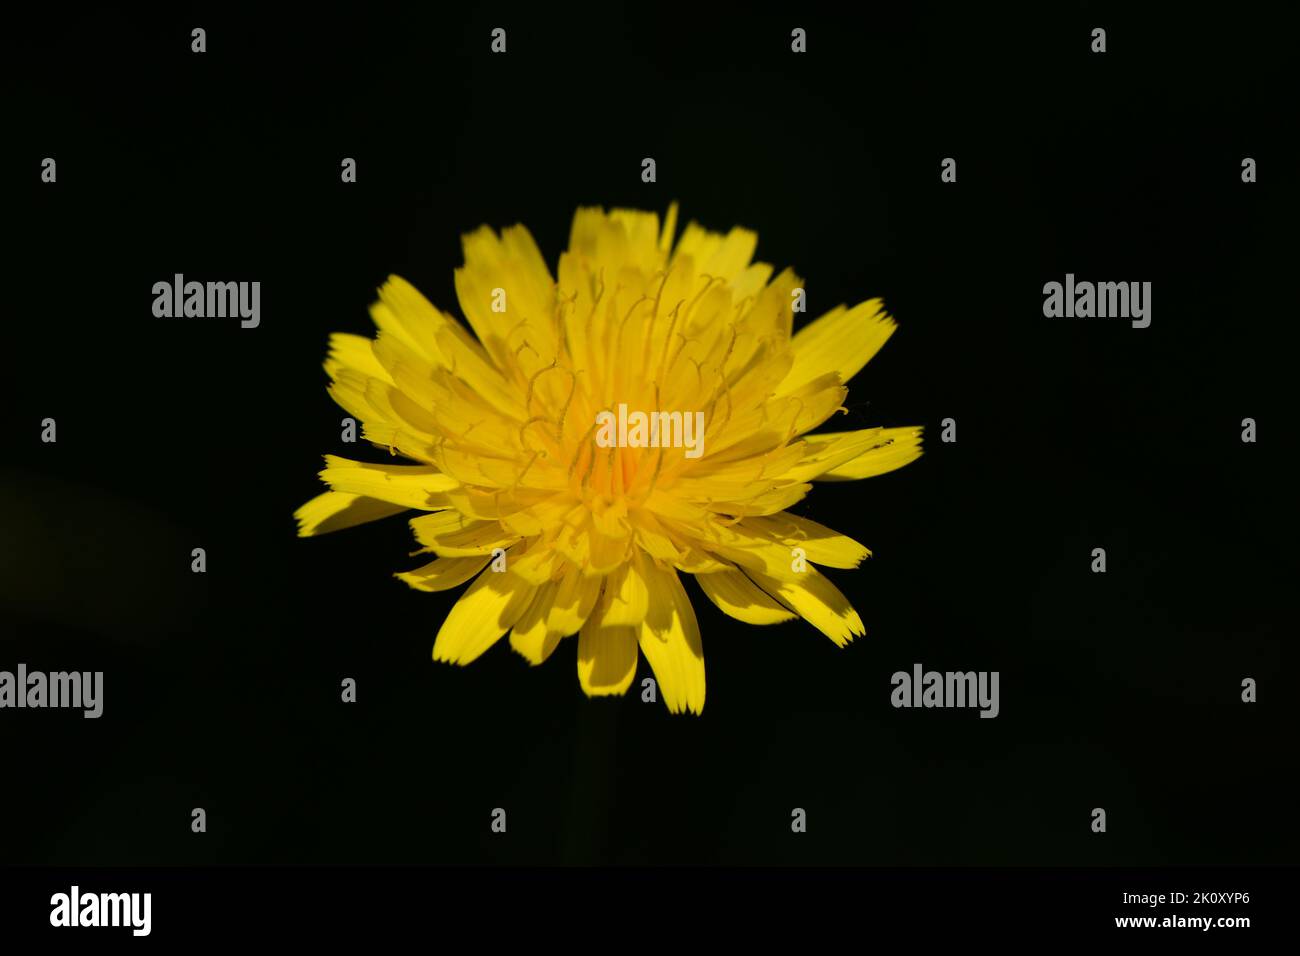 The close-up view of a lentodon saxatilis flower plant before the black background Stock Photo